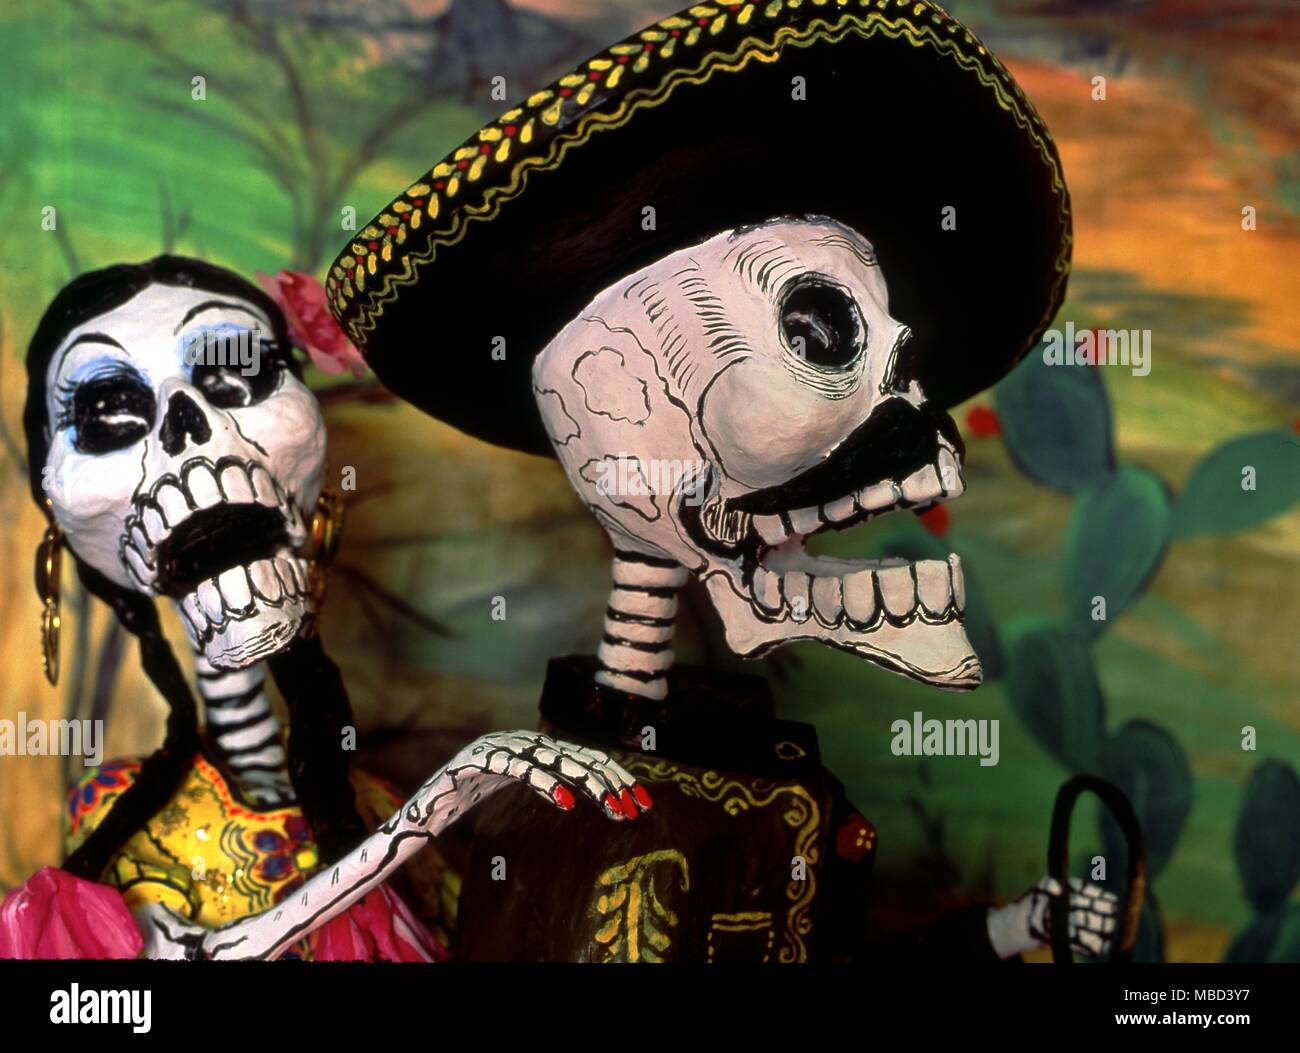 Mexican Festival of the Dead, involves the preparation of crude or artistic images of Death in the form of skeletons. Oaxaca Fiesta de Muertos. Stock Photo